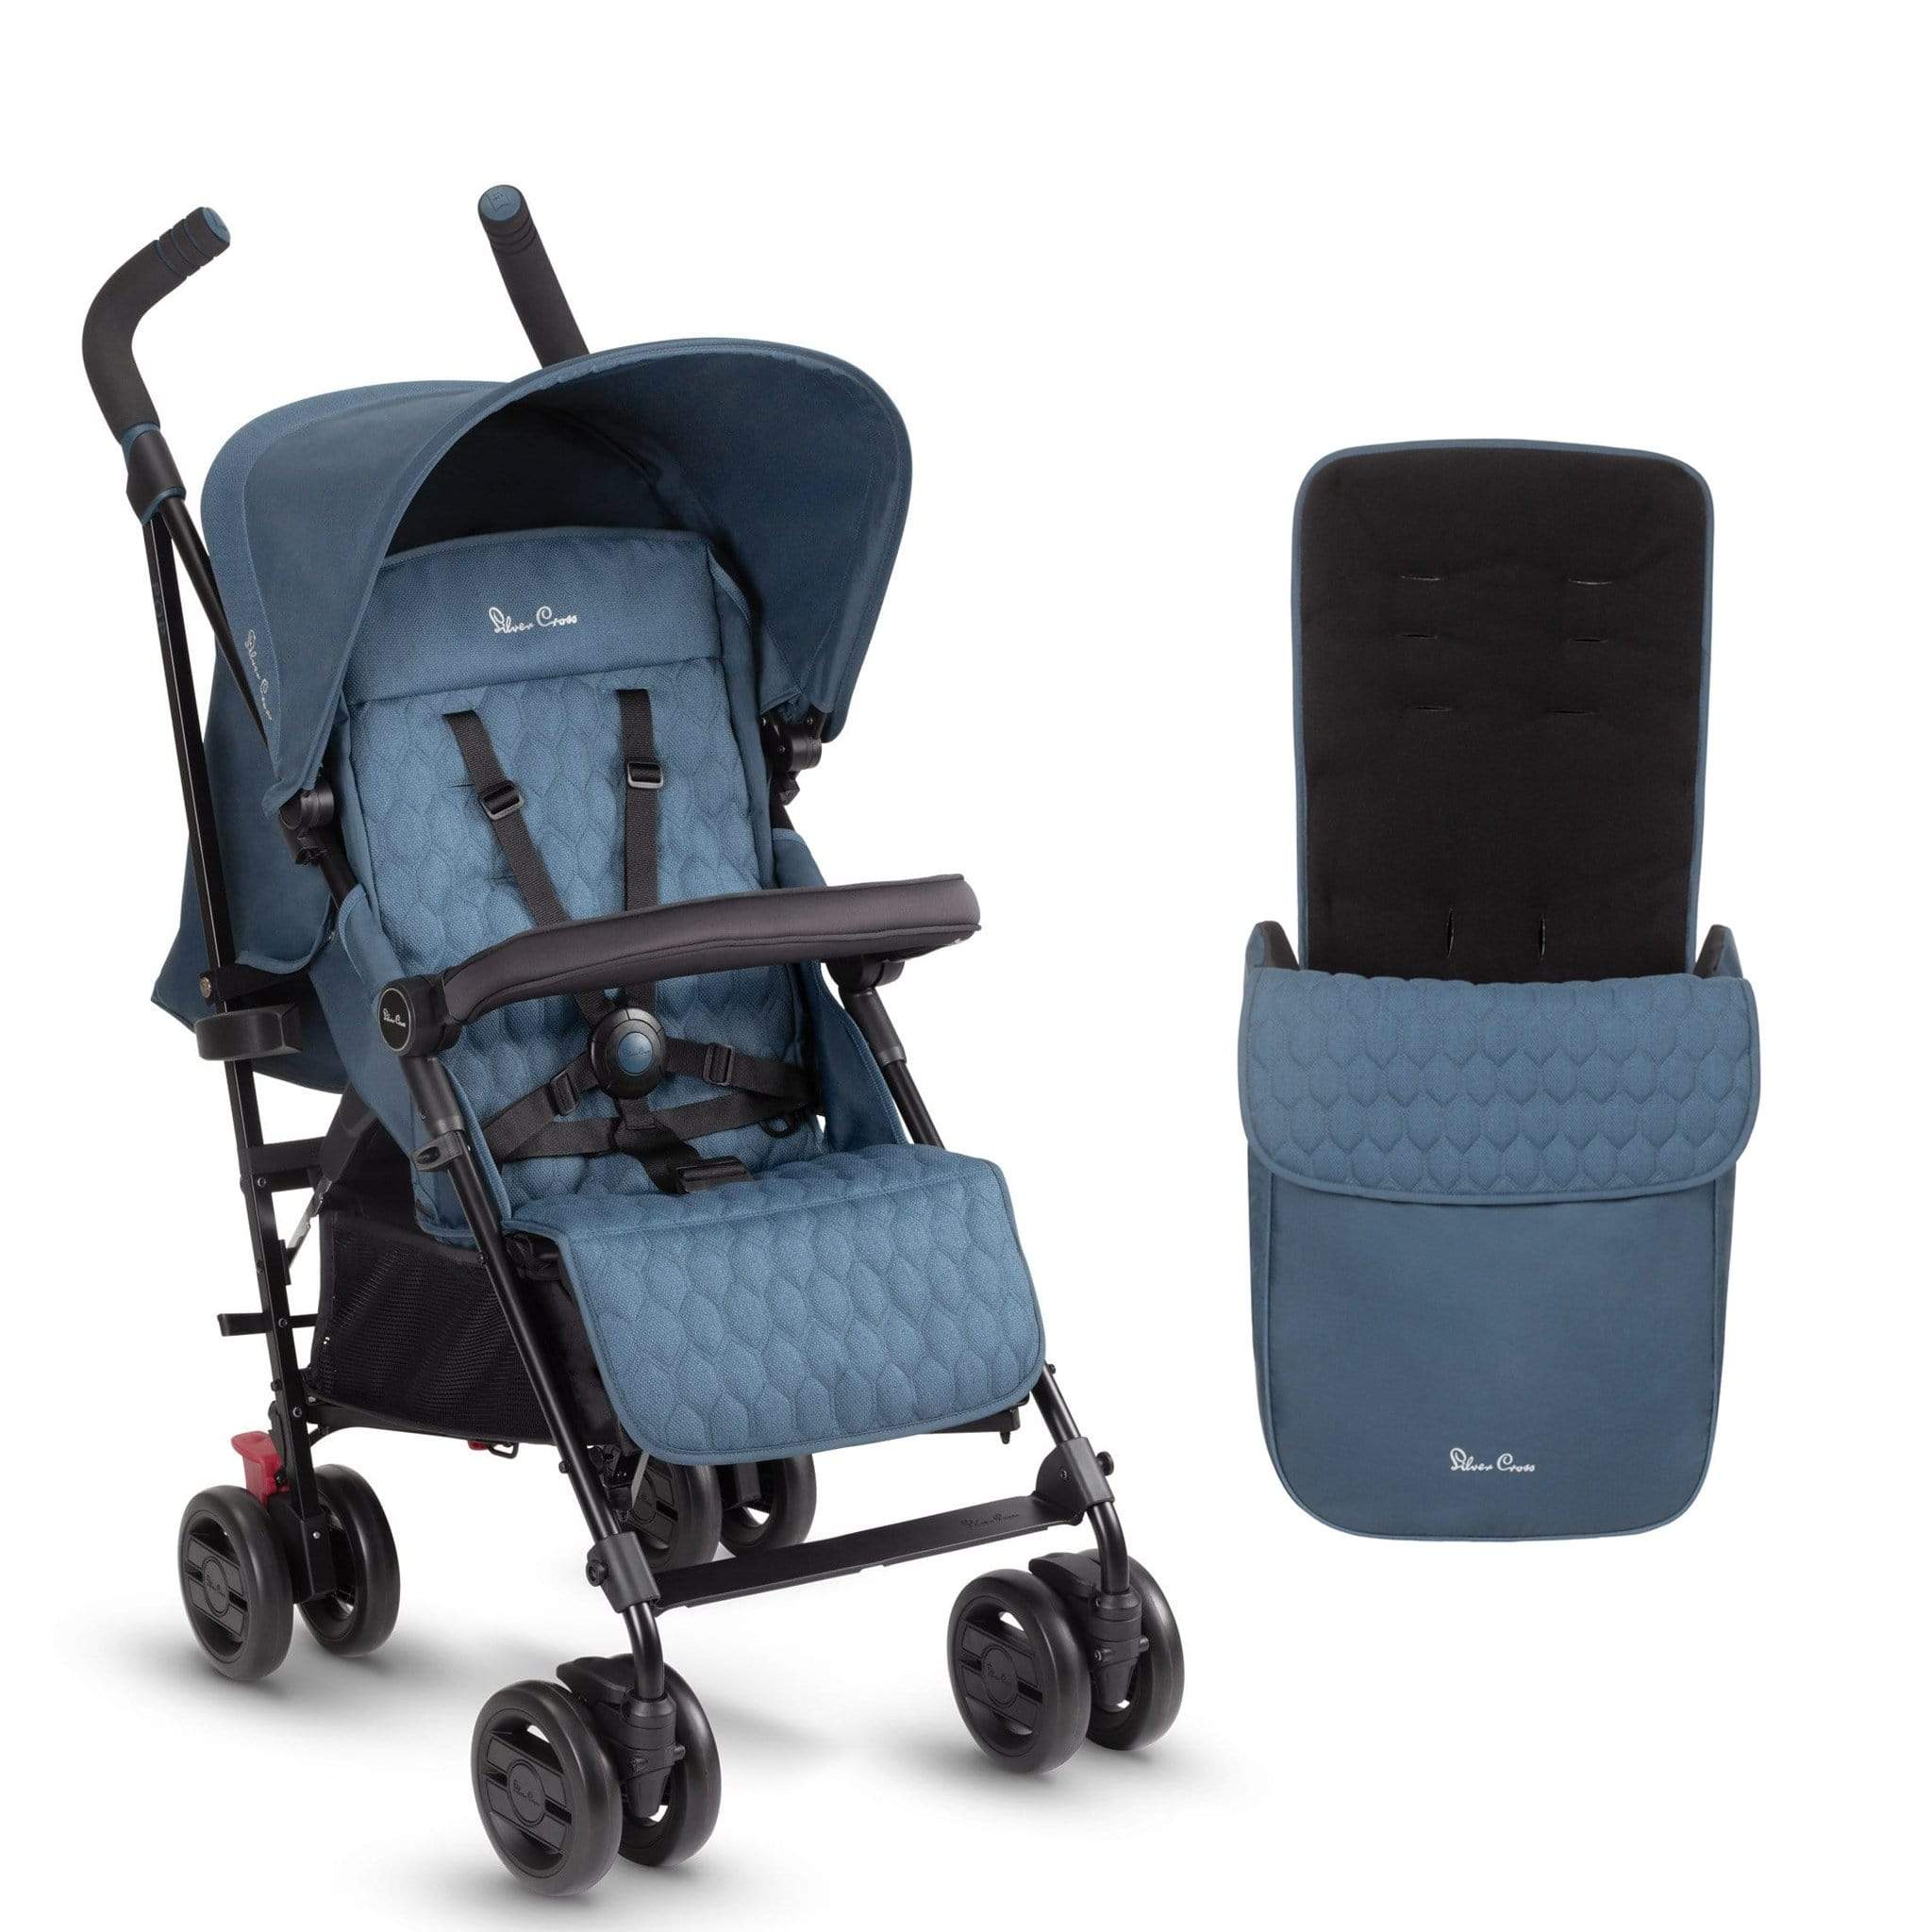 Silver Cross Pop Stroller With Free Footmuff in Bilberry Pushchairs & Buggies 10439-BIL 5055836920997